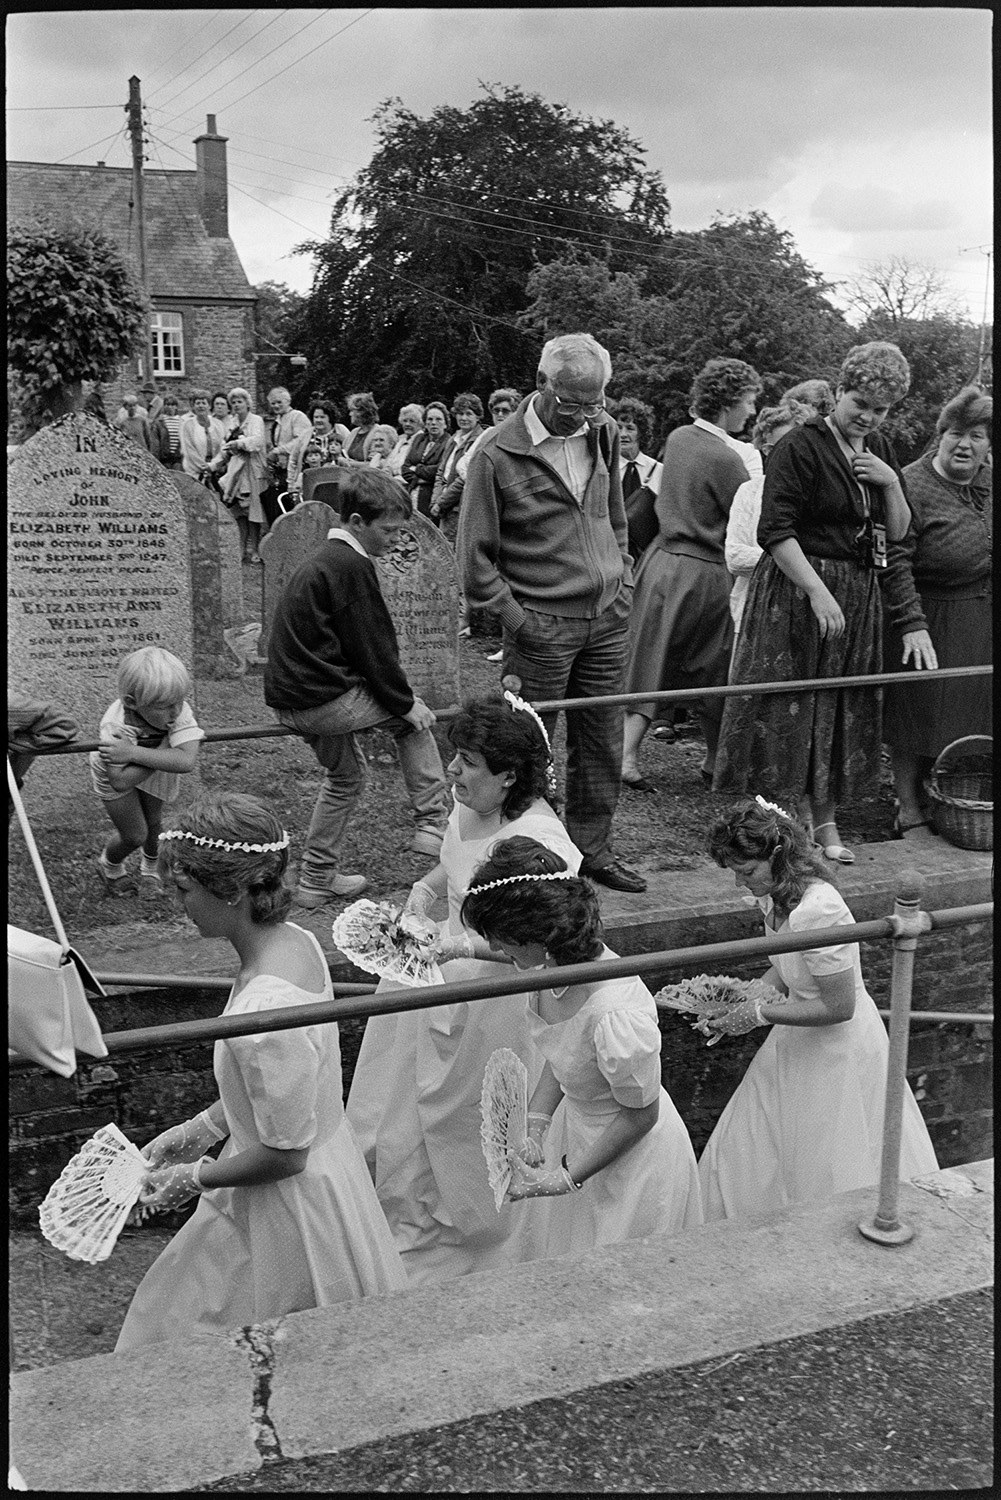 Onlookers at wedding, bride and groom arriving and leaving church in vintage car.
[Bridesmaids walking up Chulmleigh Church path to a wedding. Onlookers are gathered in the churchyard watching the procession.]